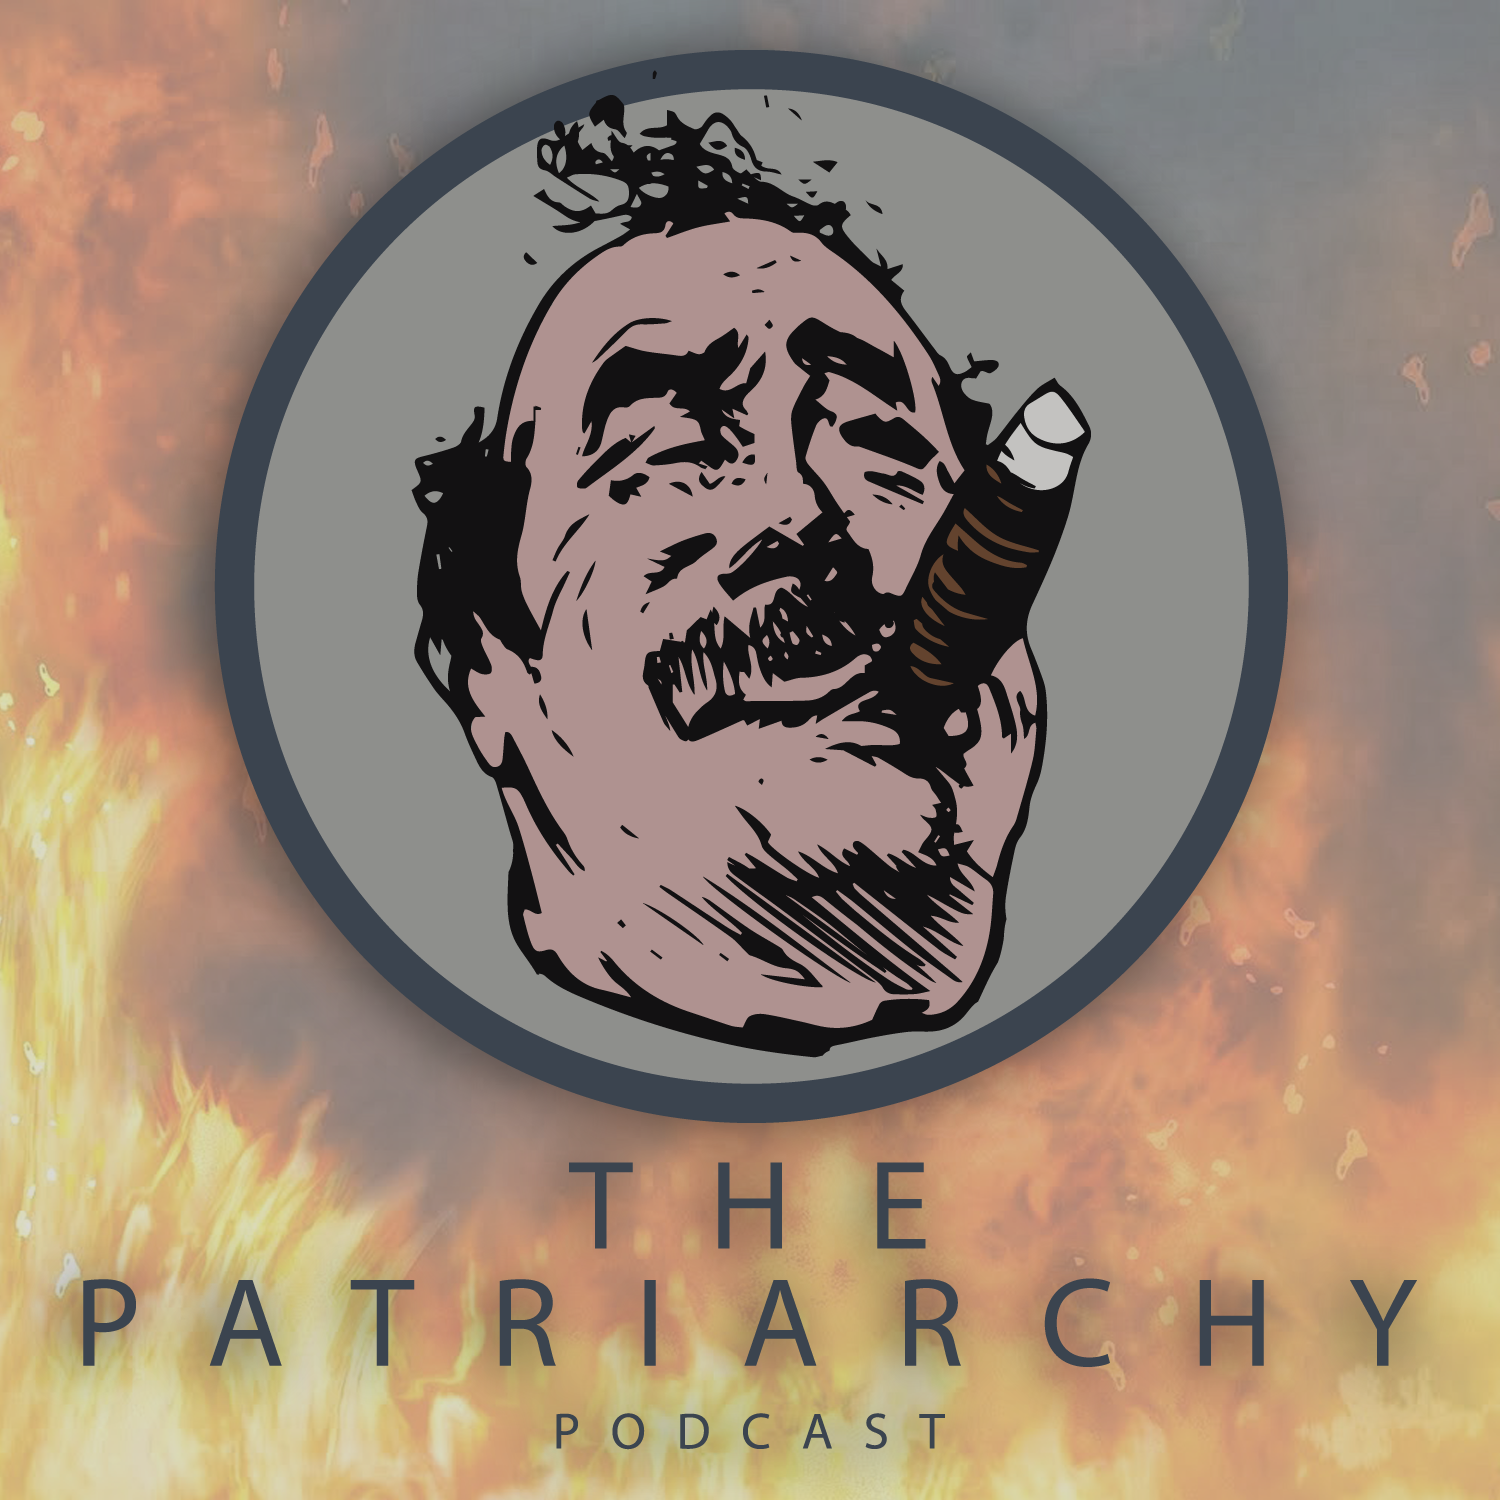 The Patriarchy Podcast: Unplugged (Ep 41.6)